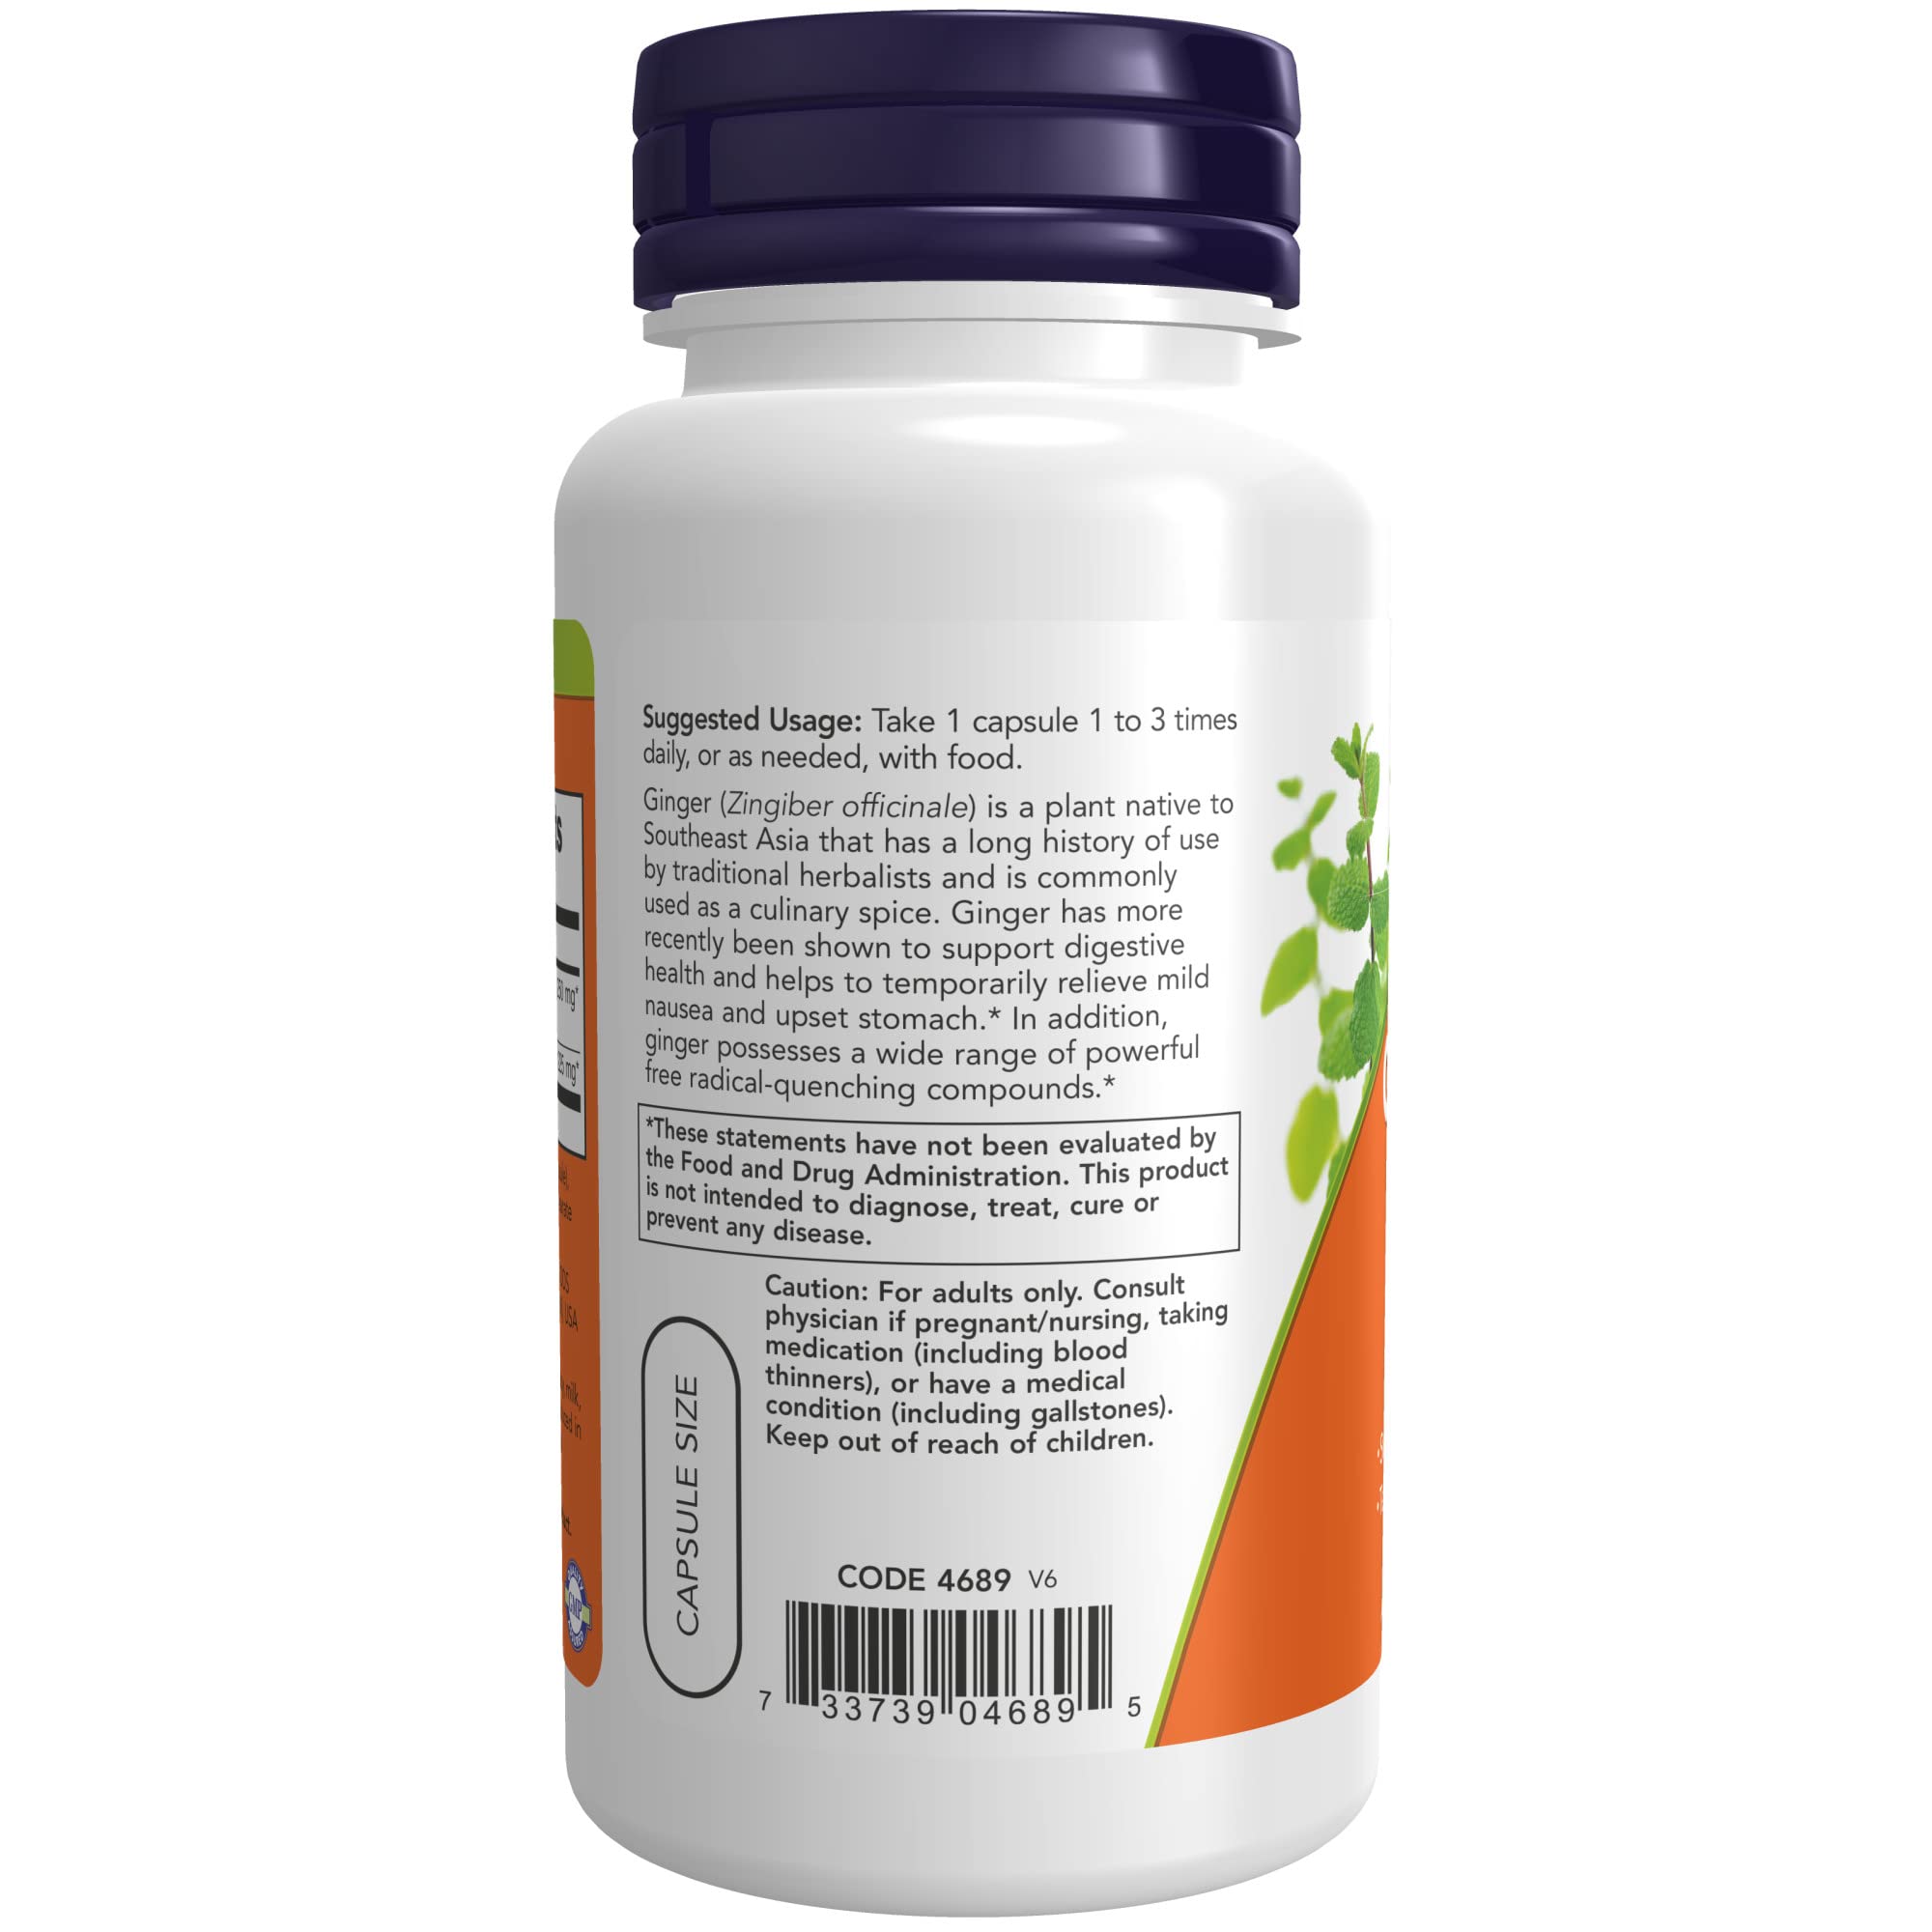 NOW Supplements, Ginger Root Extract 250 mg, Temporary Relief of Upset Stomach*, Digestive Support*, 90 Veg Capsules